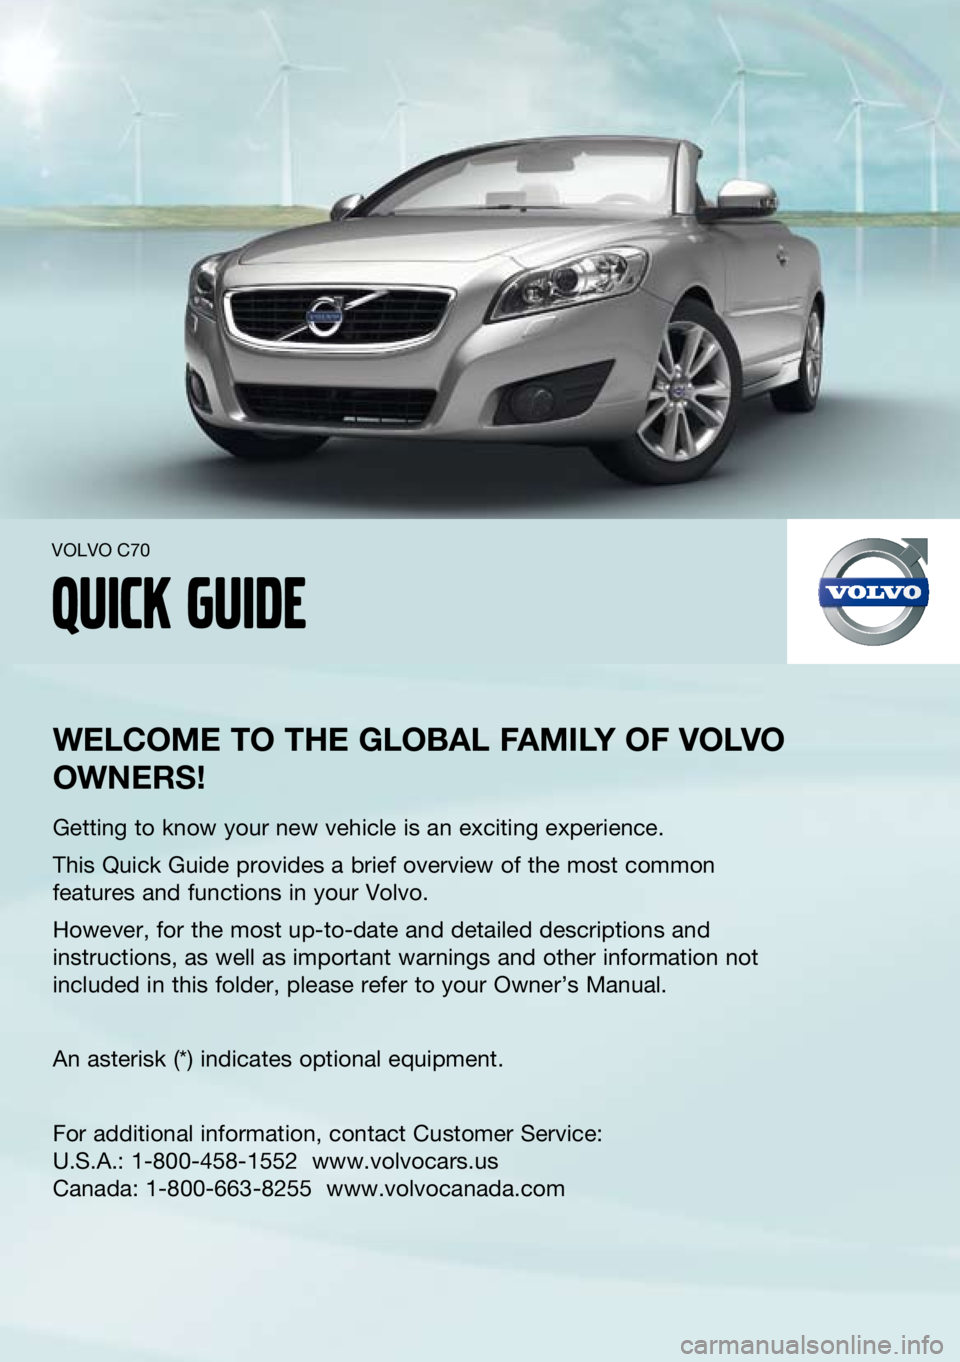 VOLVO C70 2012  Quick Guide 
welcome to the  global F amIly  oF  volvo 
owners !
Getting to know your new vehicle is an exciting experience.
this Quick Guide provides a brief overview of the most common 
features and functions i